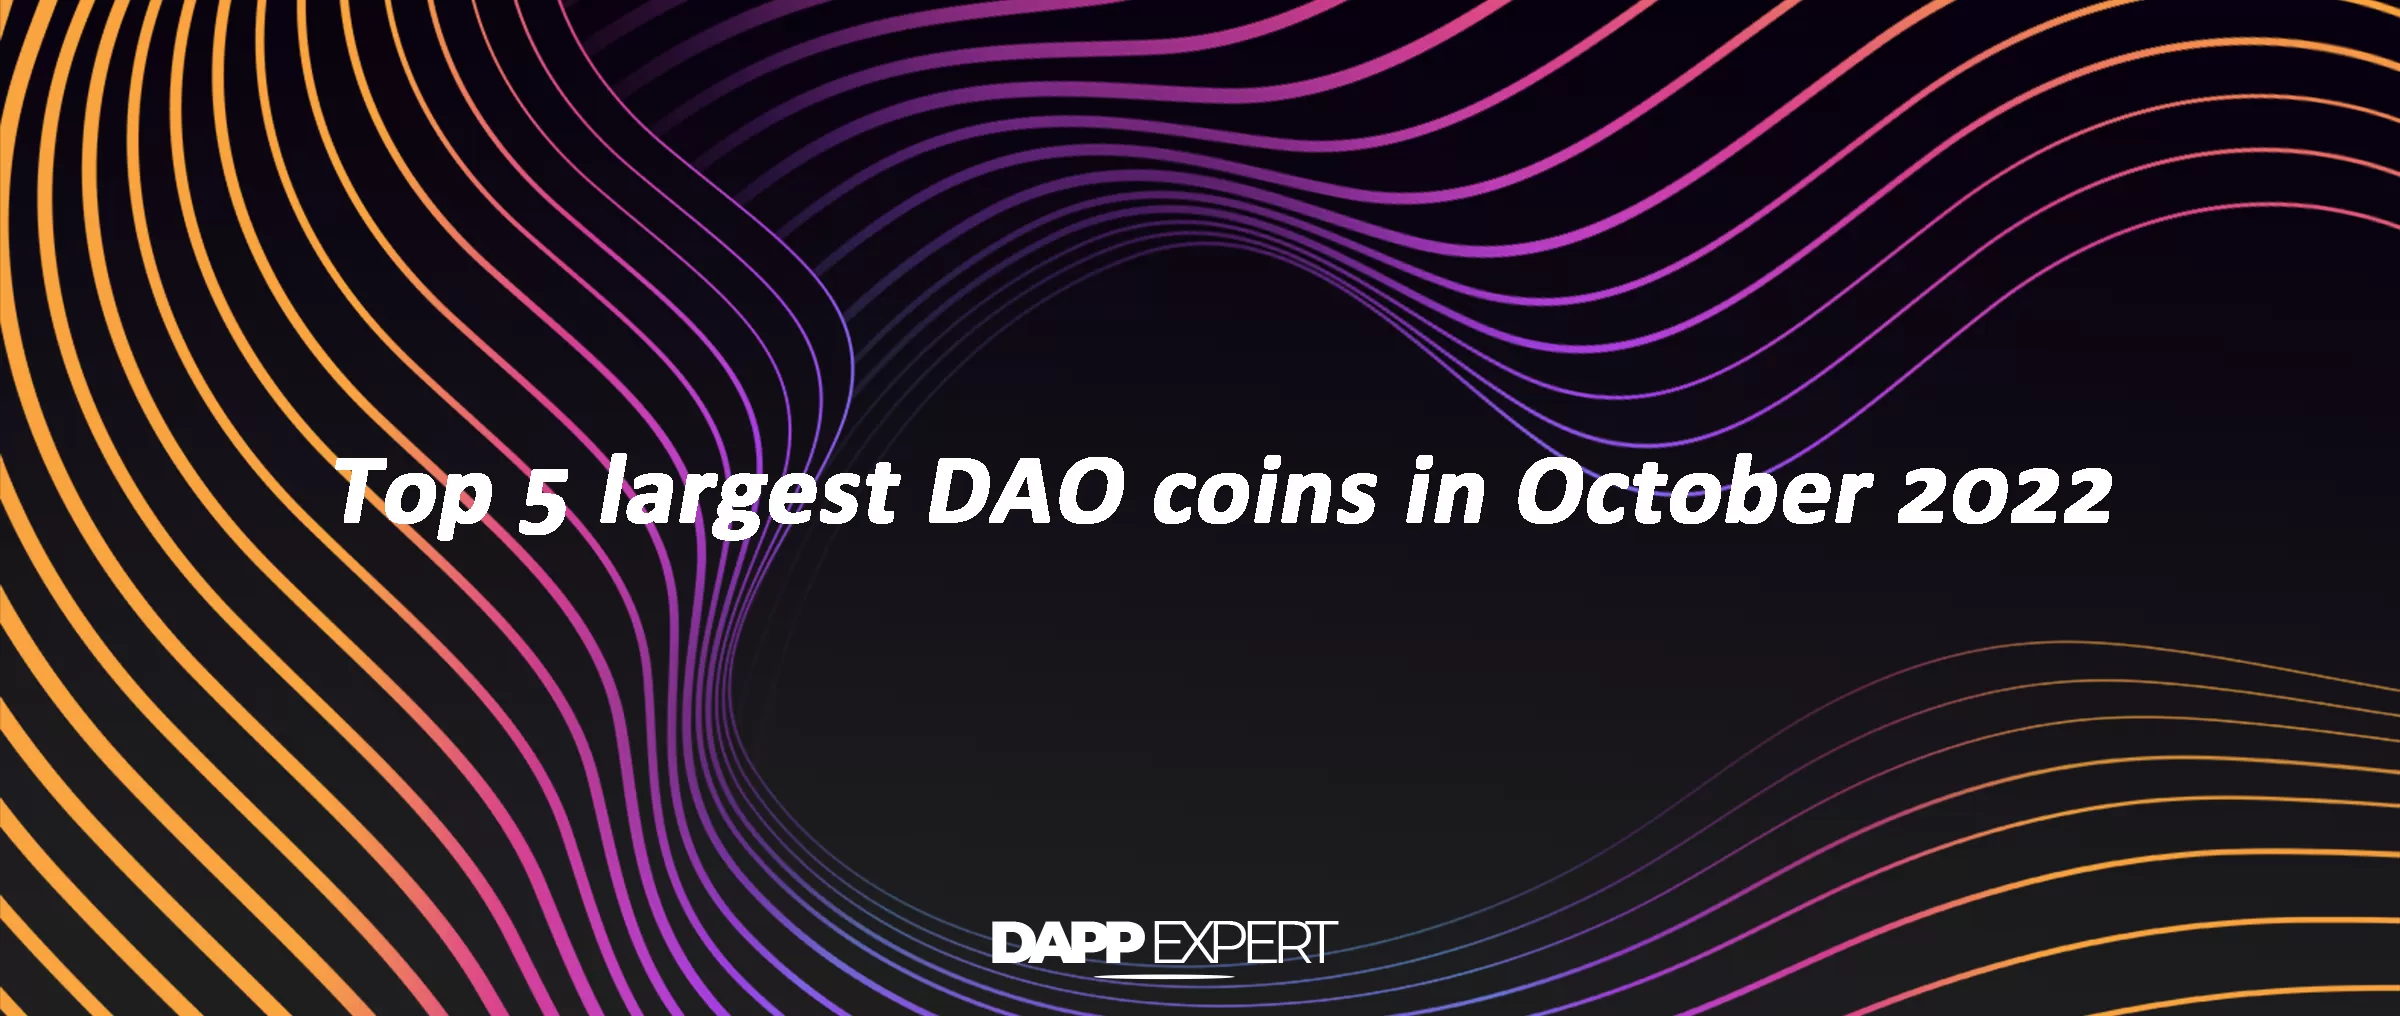 Top 5 largest DAO coins in October 2022